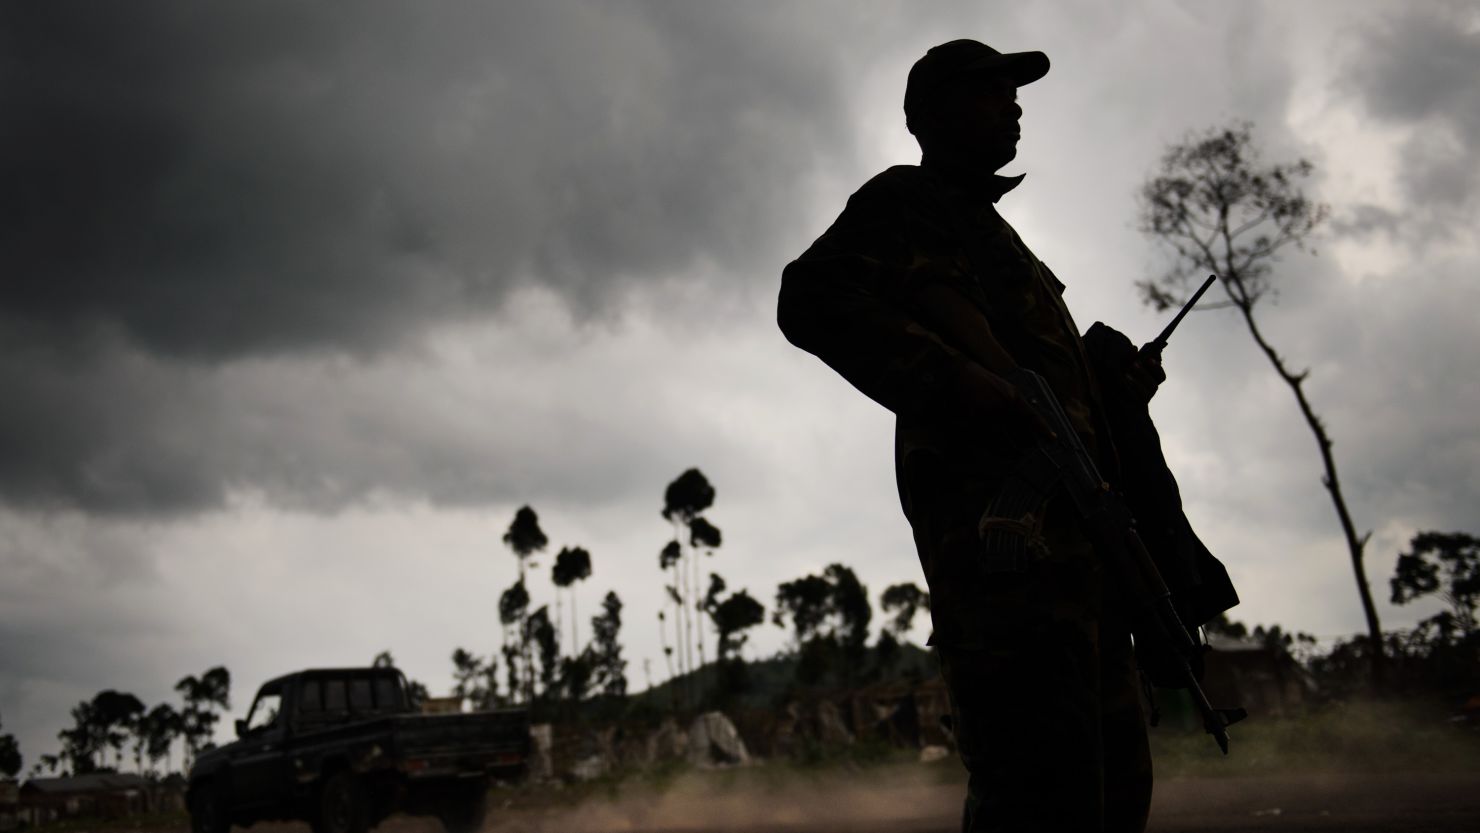 An M23 rebel stands guard in the village of Kanyarucinya, in eastern Democratic Republic of the Congo, on November 18, 2012.